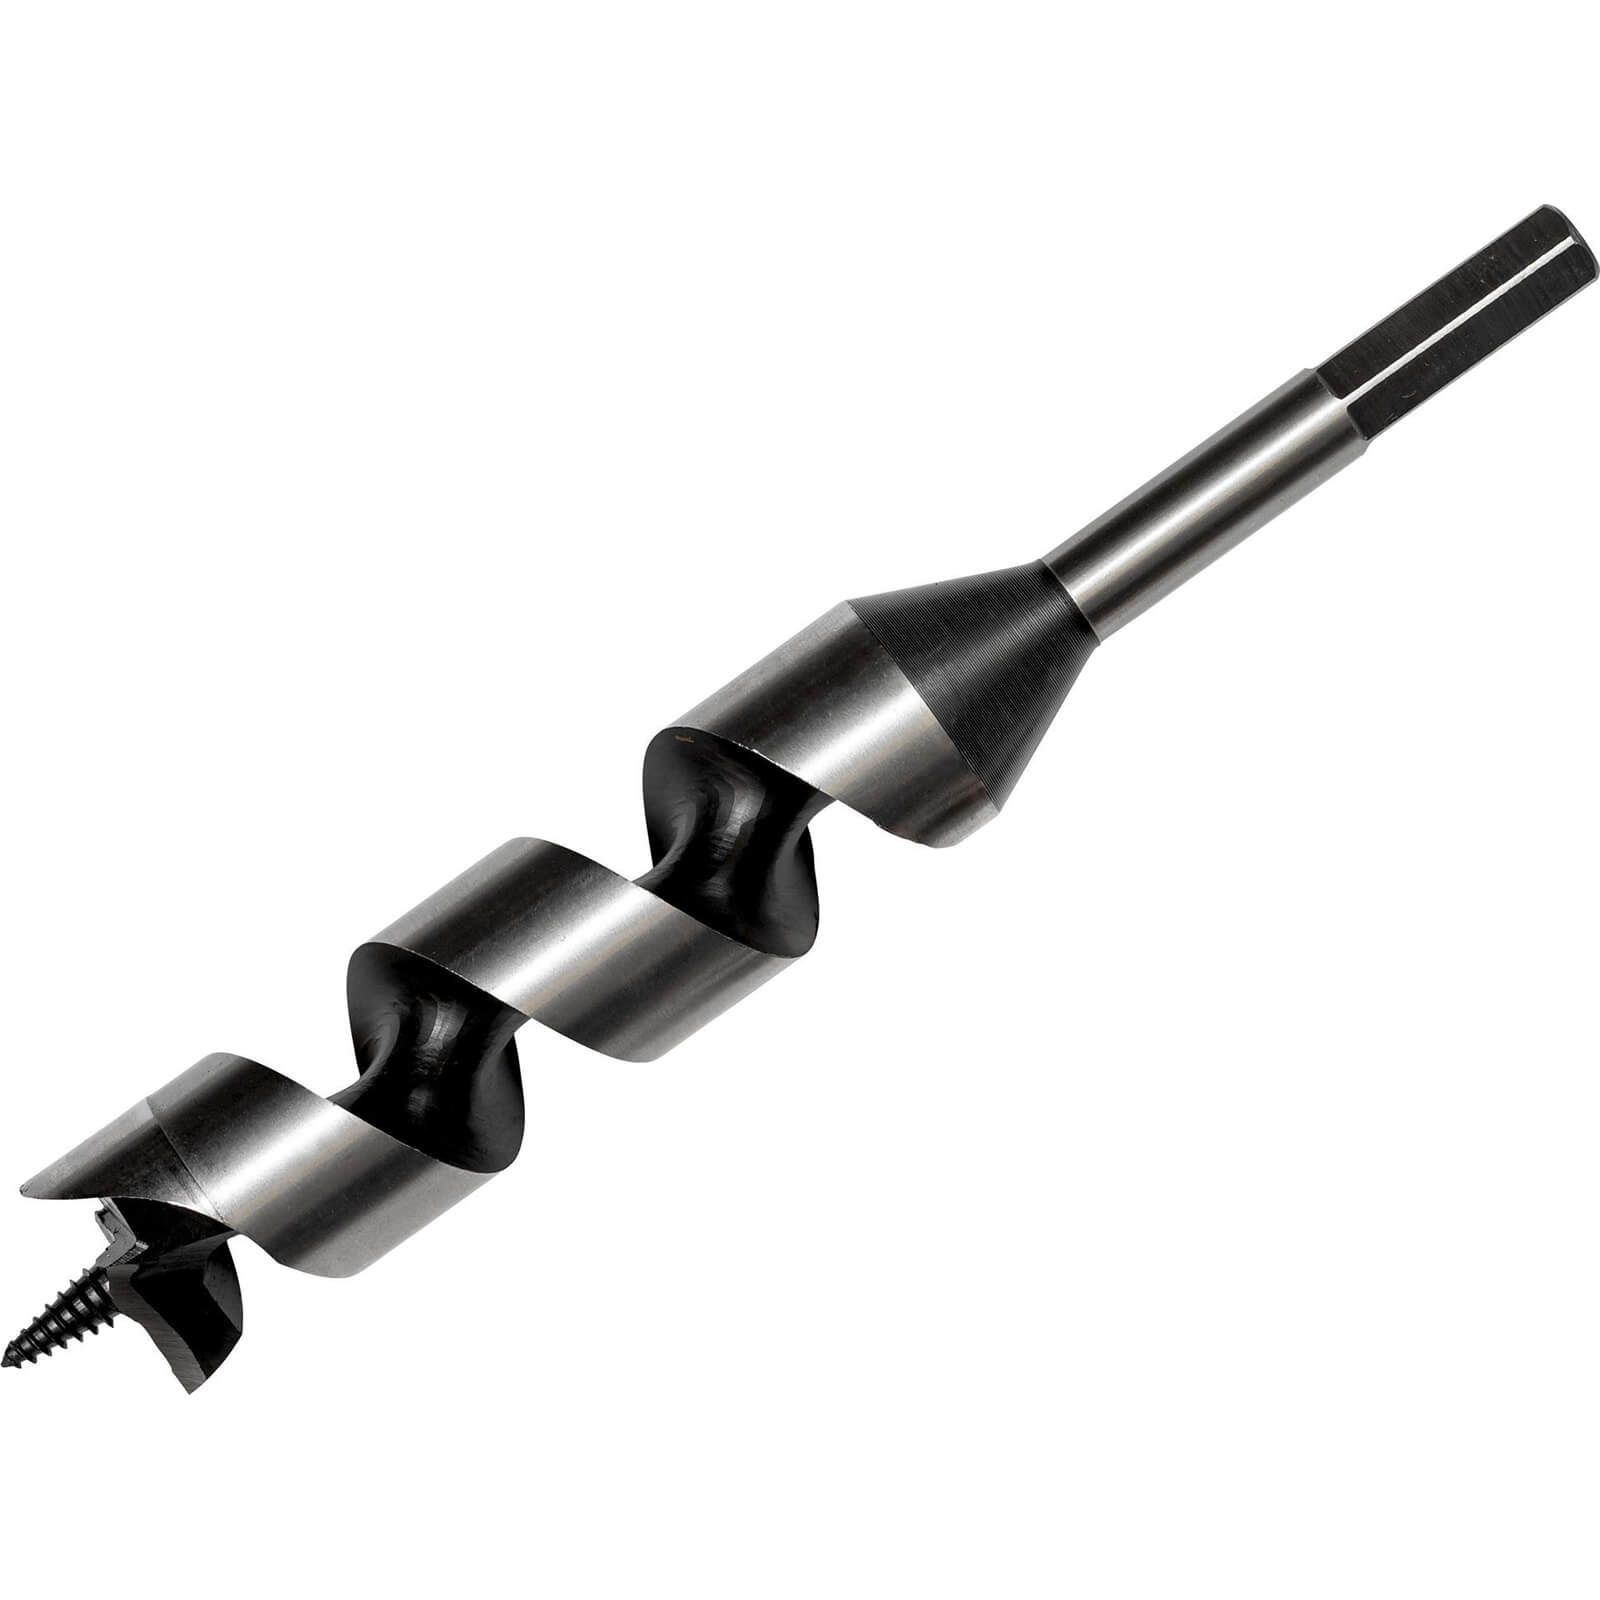 Photo of Bahco 9626 Series Combination Auger Drill Bit 23mm 230mm